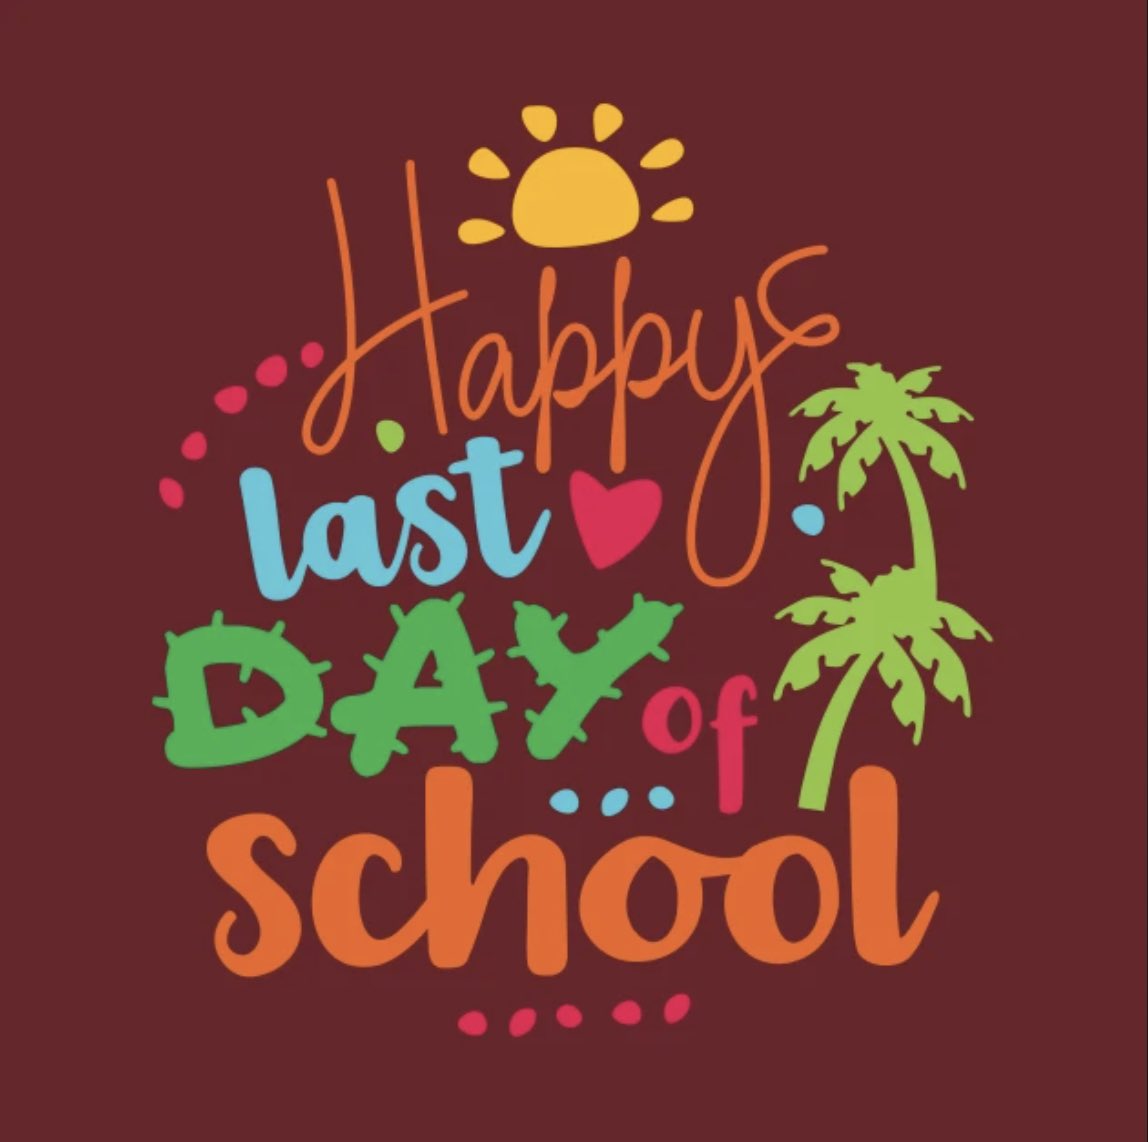 Hope you have a great summer! If you haven’t ordered your Free ARE shirt, check your personal email for a link to your sites google form.